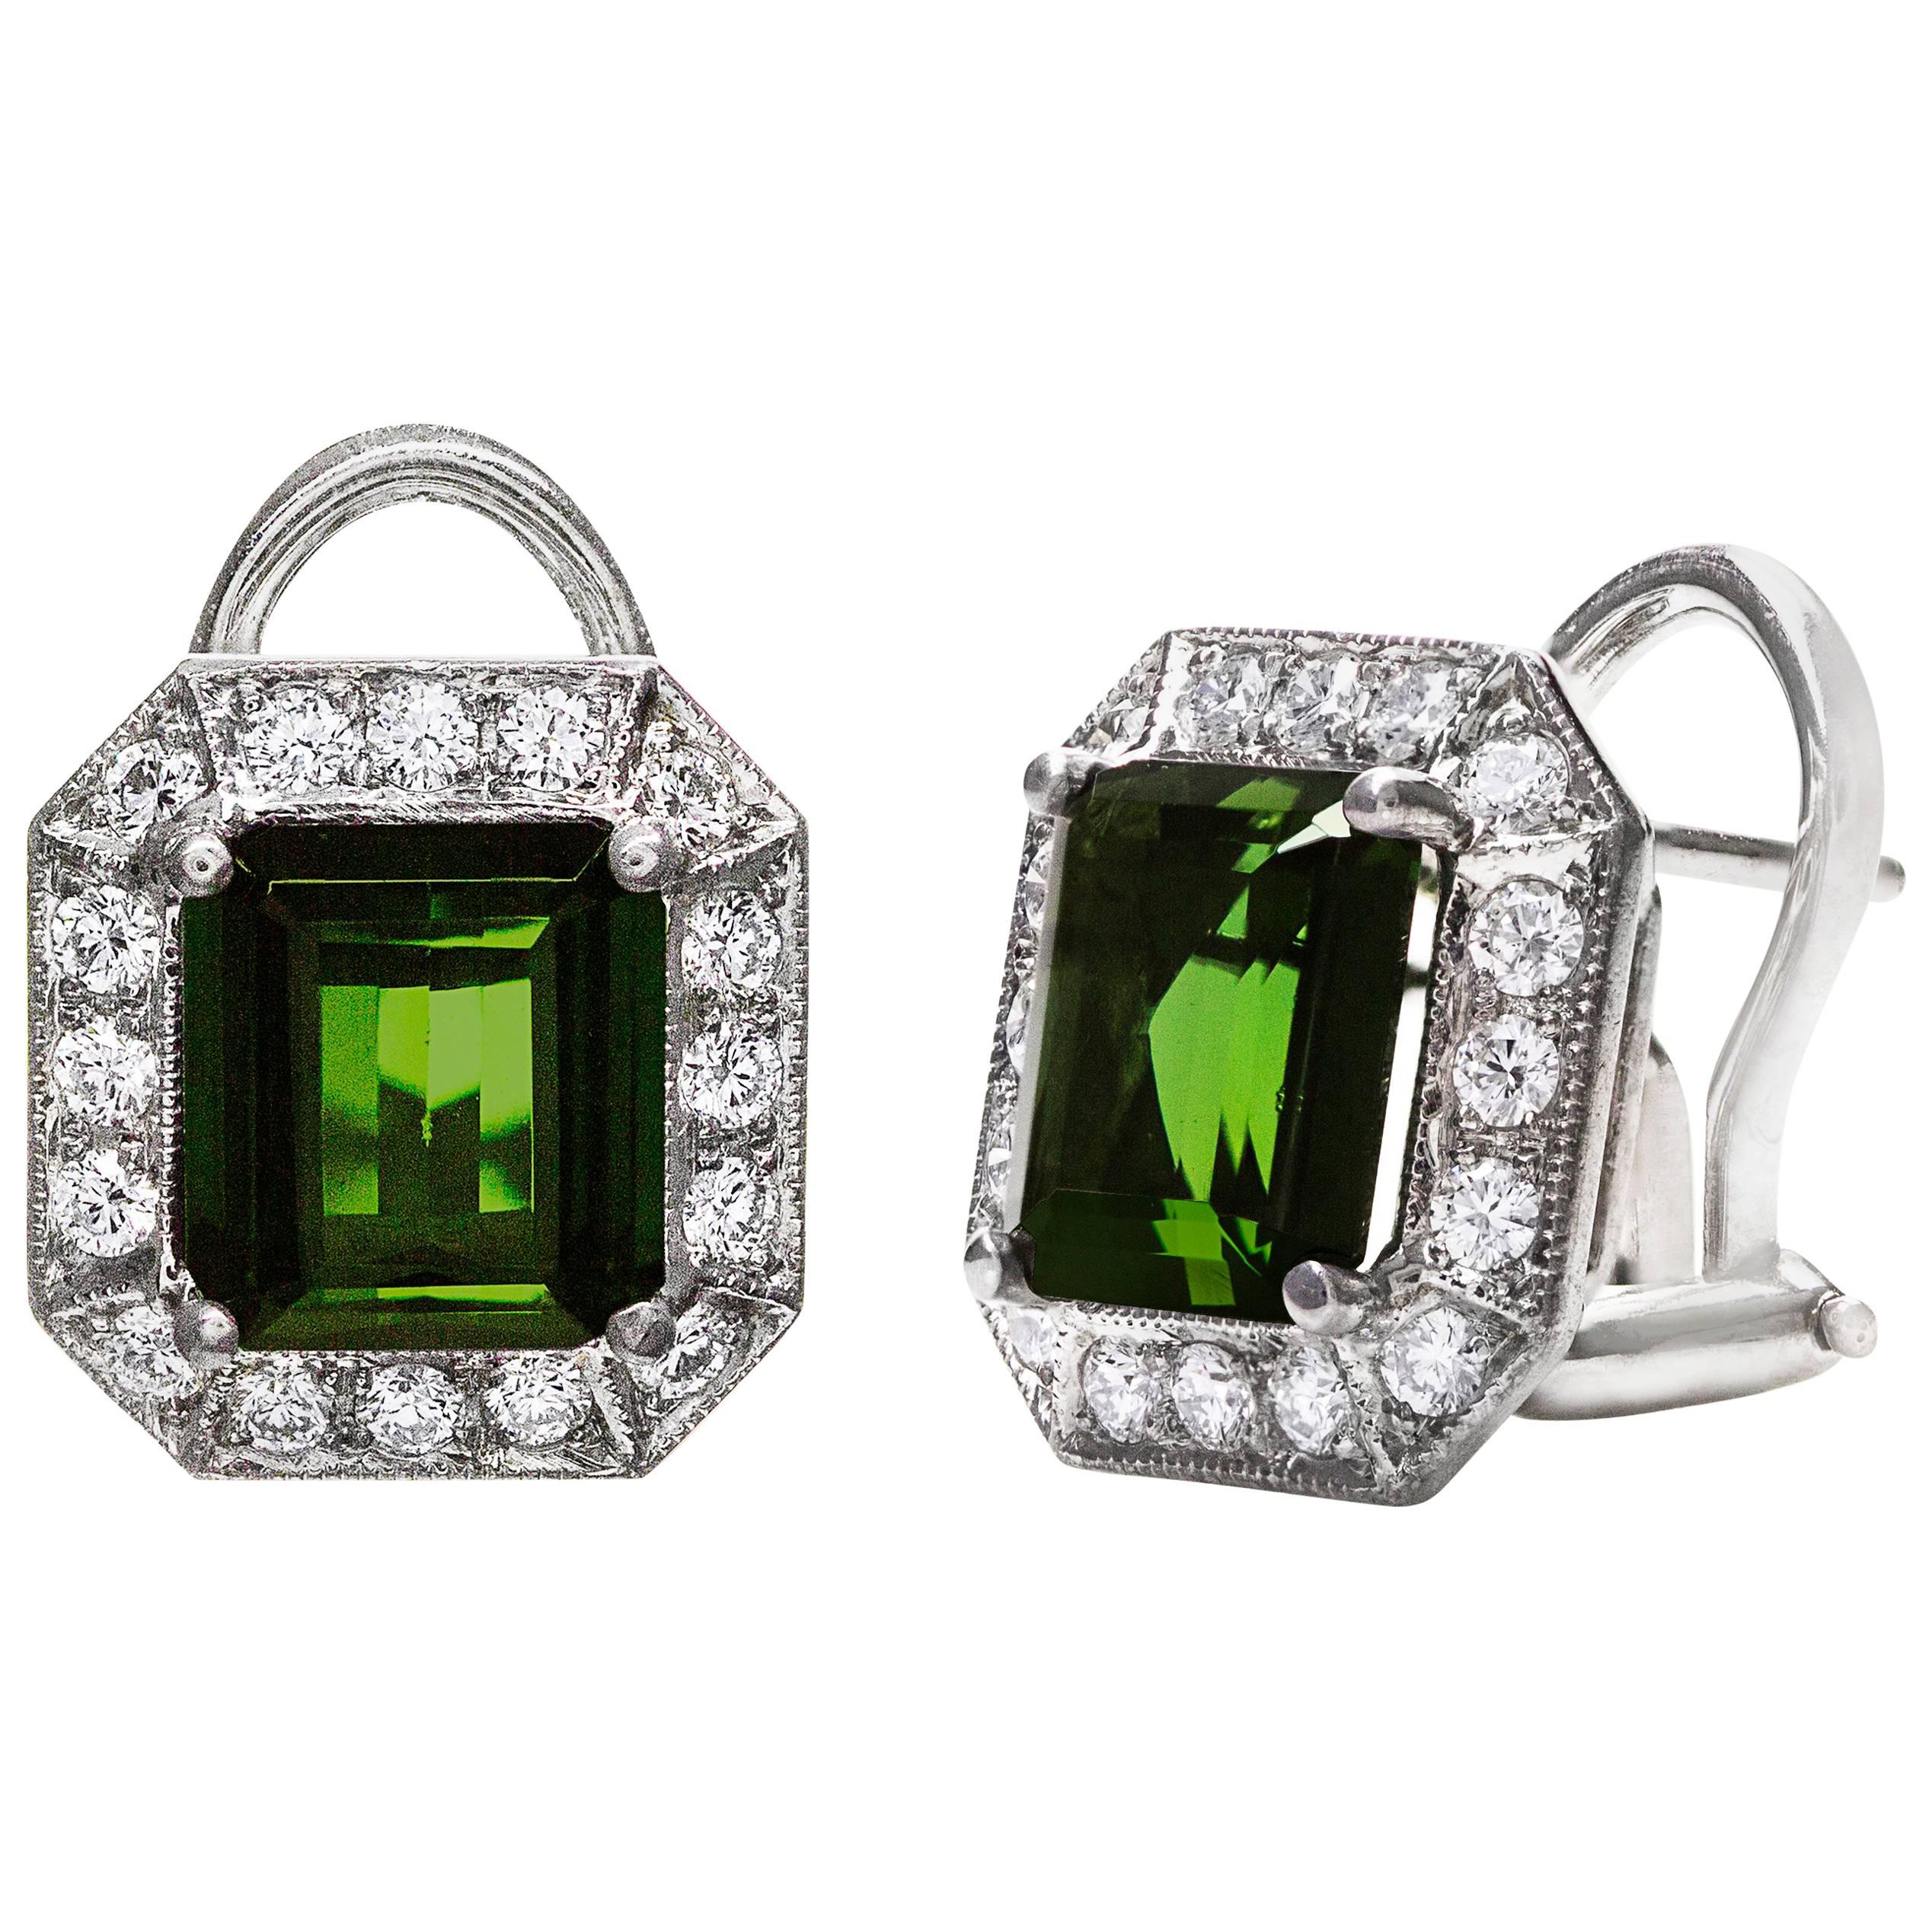 A gorgeous pair of earrings showcasing two emerald cut green tourmaline weighing 3.63 carats total, set in a classic four prong setting. Surrounded by a row of round brilliant diamond weighing 0.40 carats total. Finished with milgrain edges. Finely